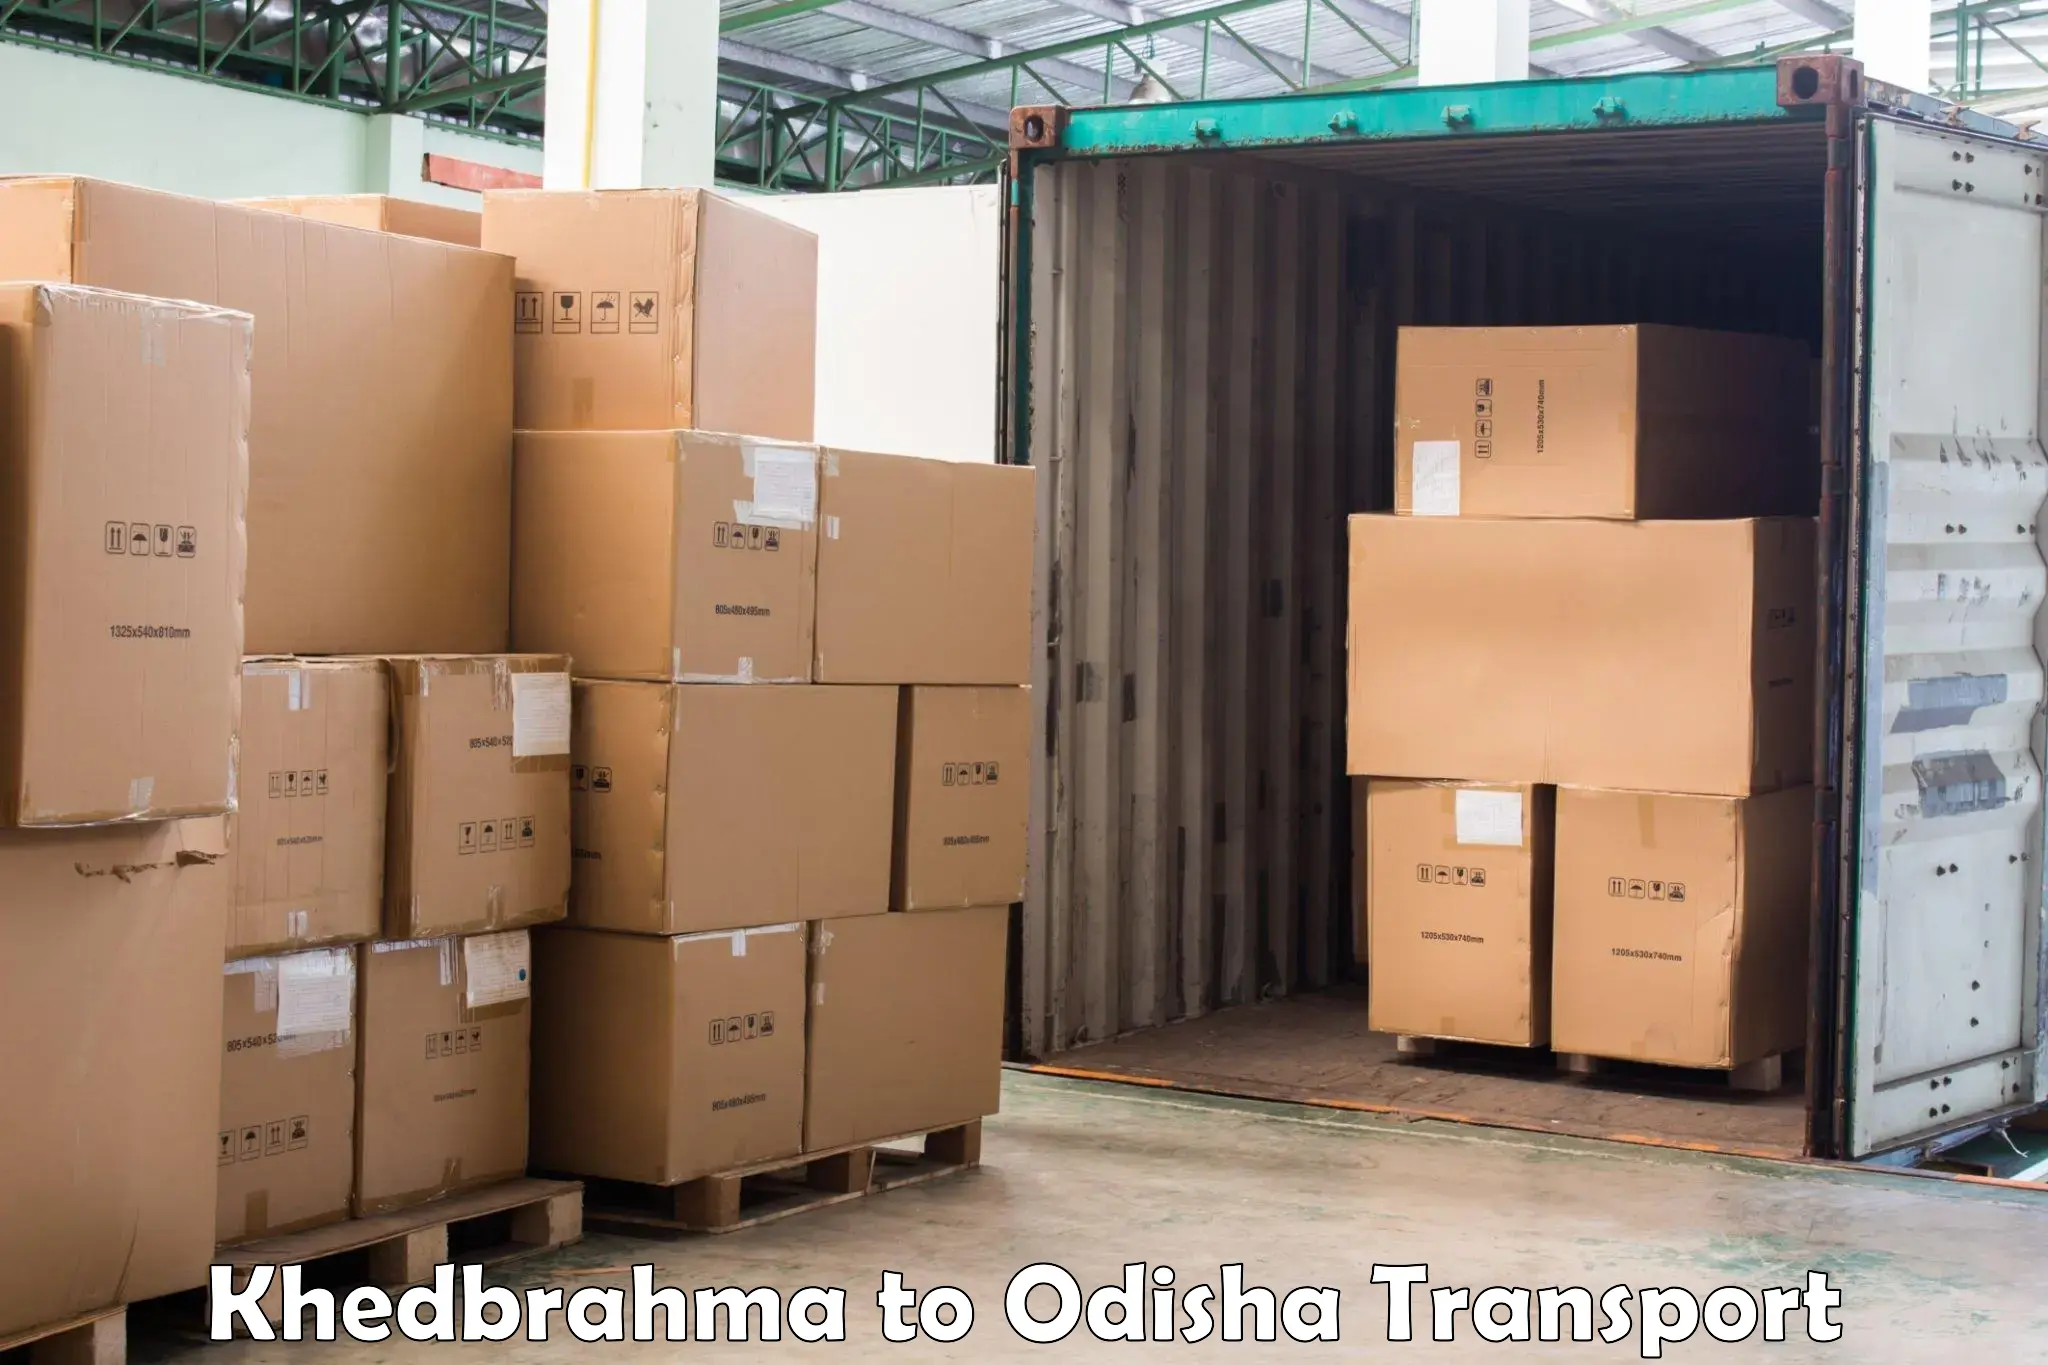 Vehicle transport services in Khedbrahma to Mohana